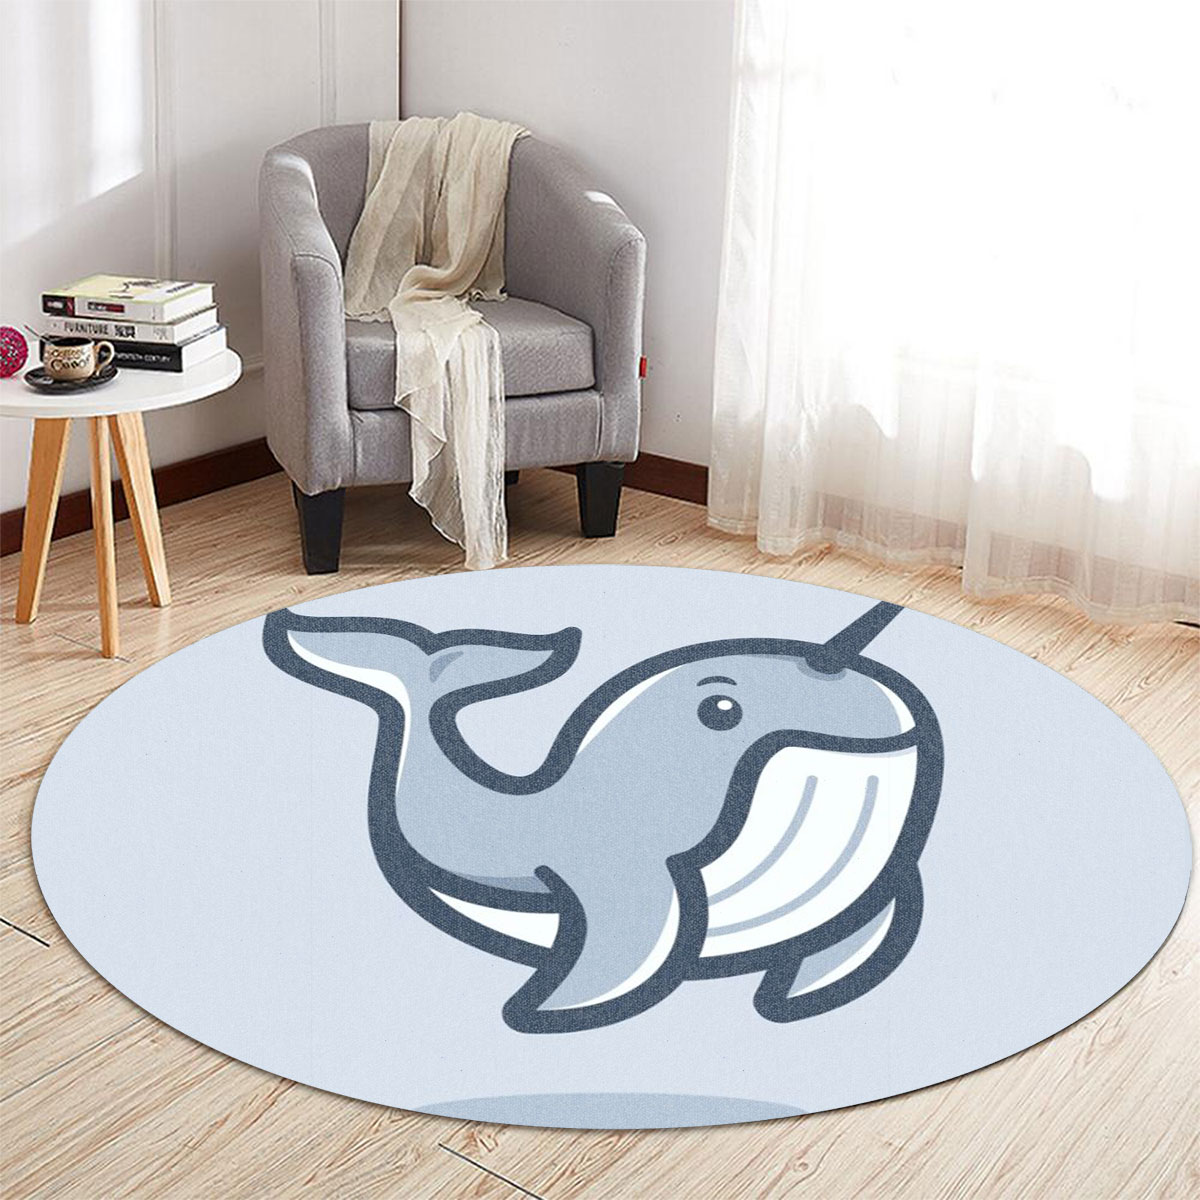 Cute Narwhal Round Carpet